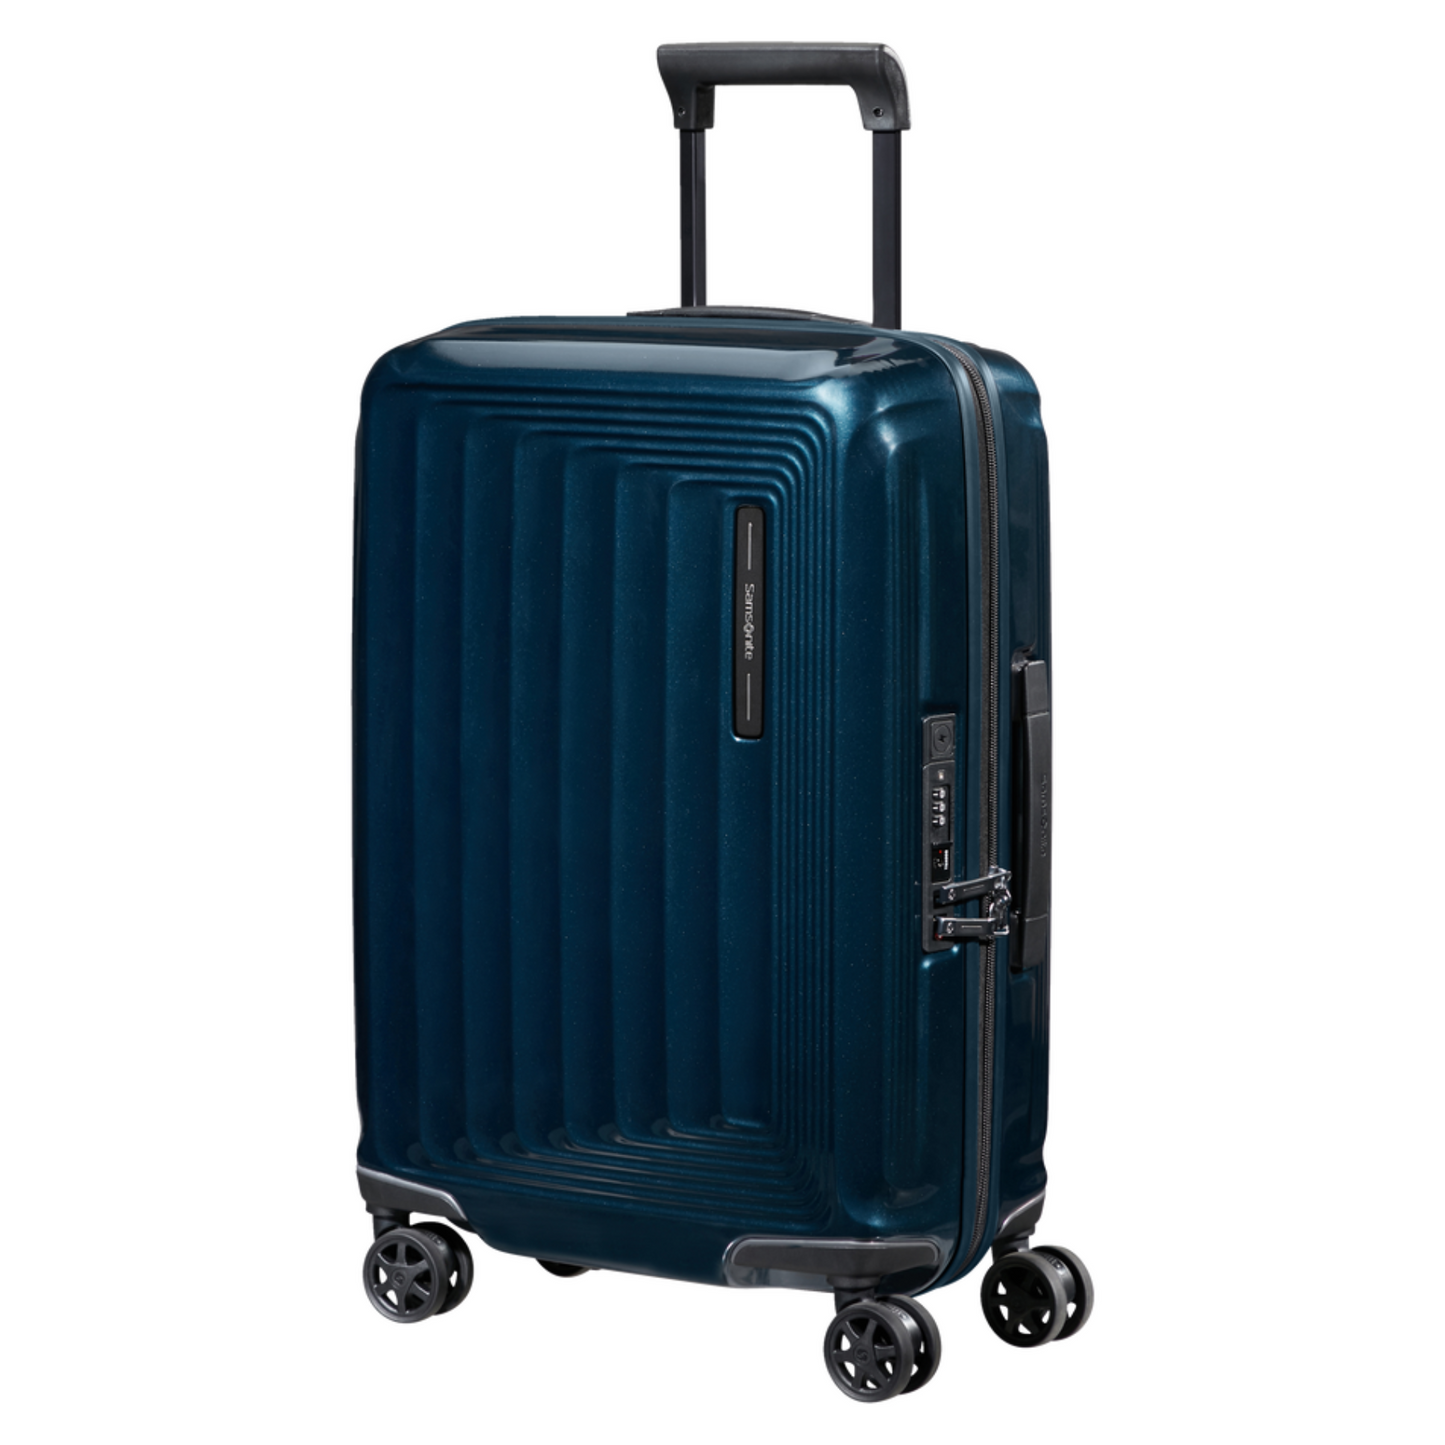 Valise Nuon 4 roues 55cm - Extensible